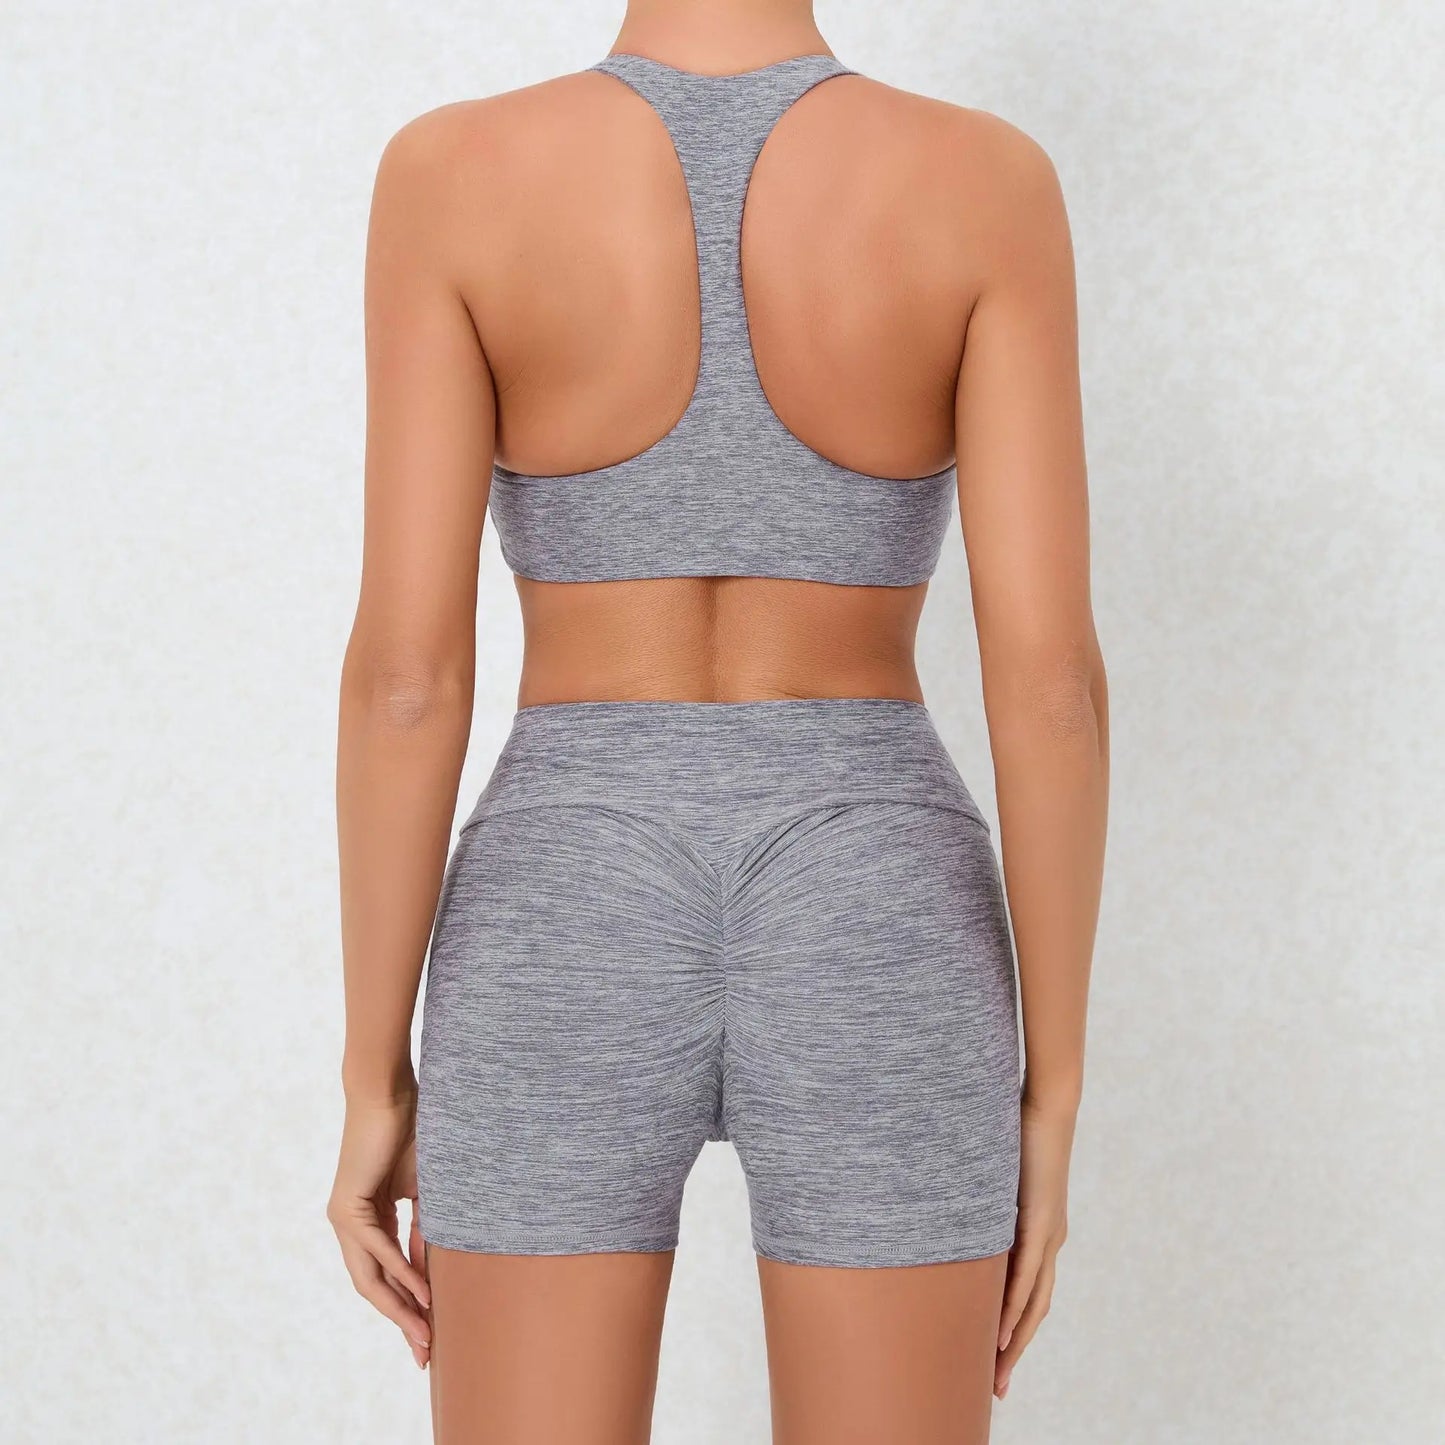 2 PIECE GYM SET WITH LACE UP BRA AND V-SHAPED SHORTS